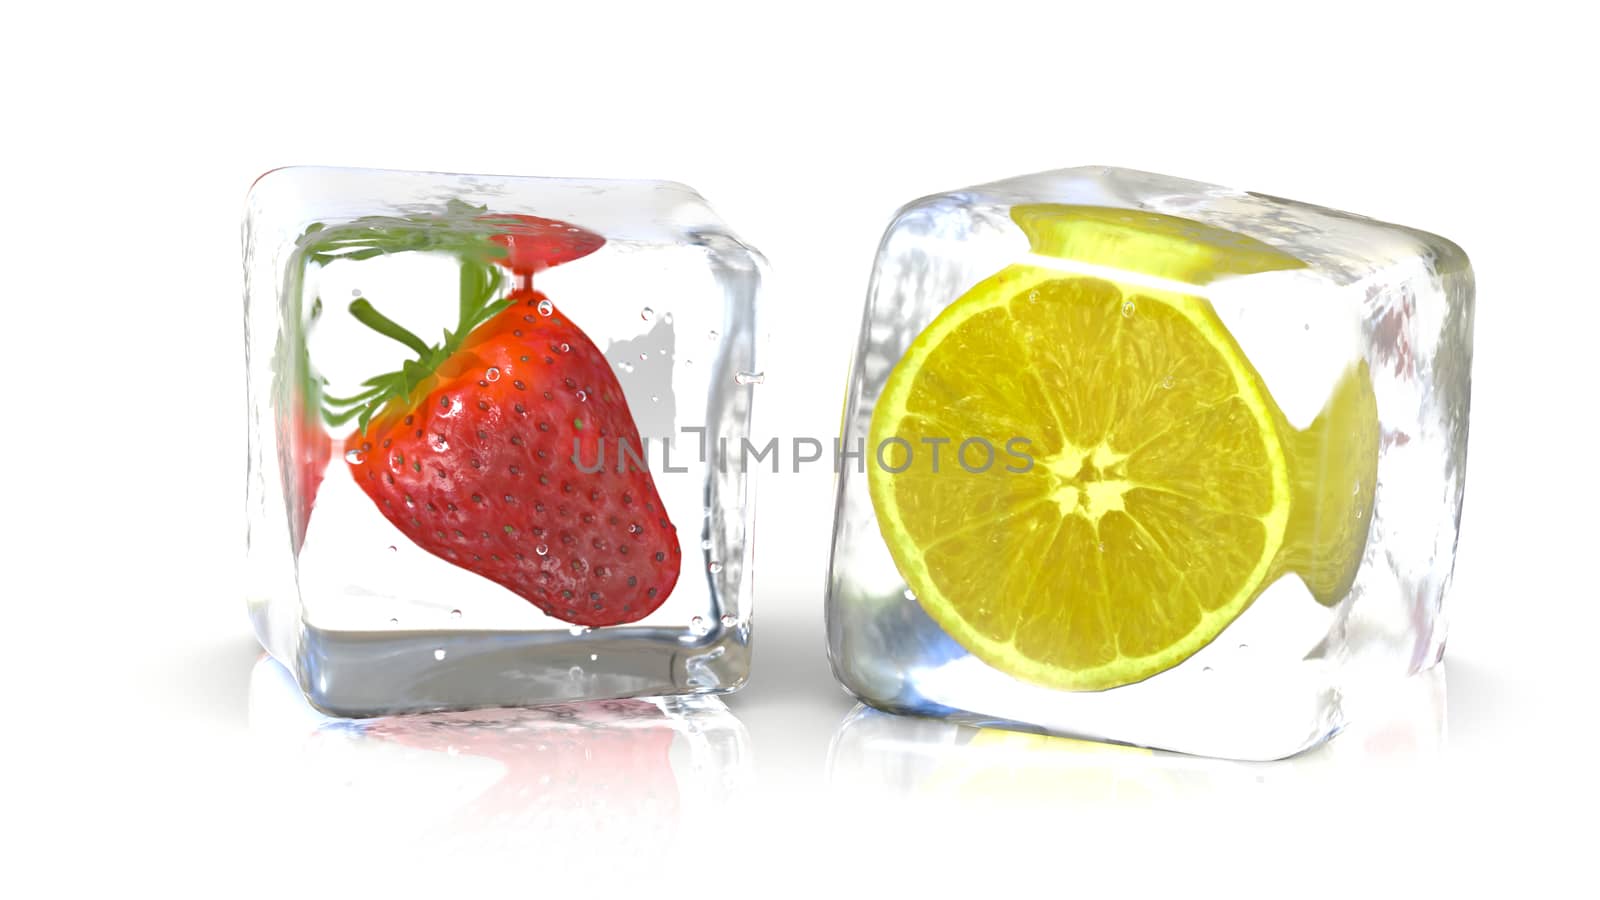 Strawberry and a lemon into fresh ice cubes. 3D Rendering